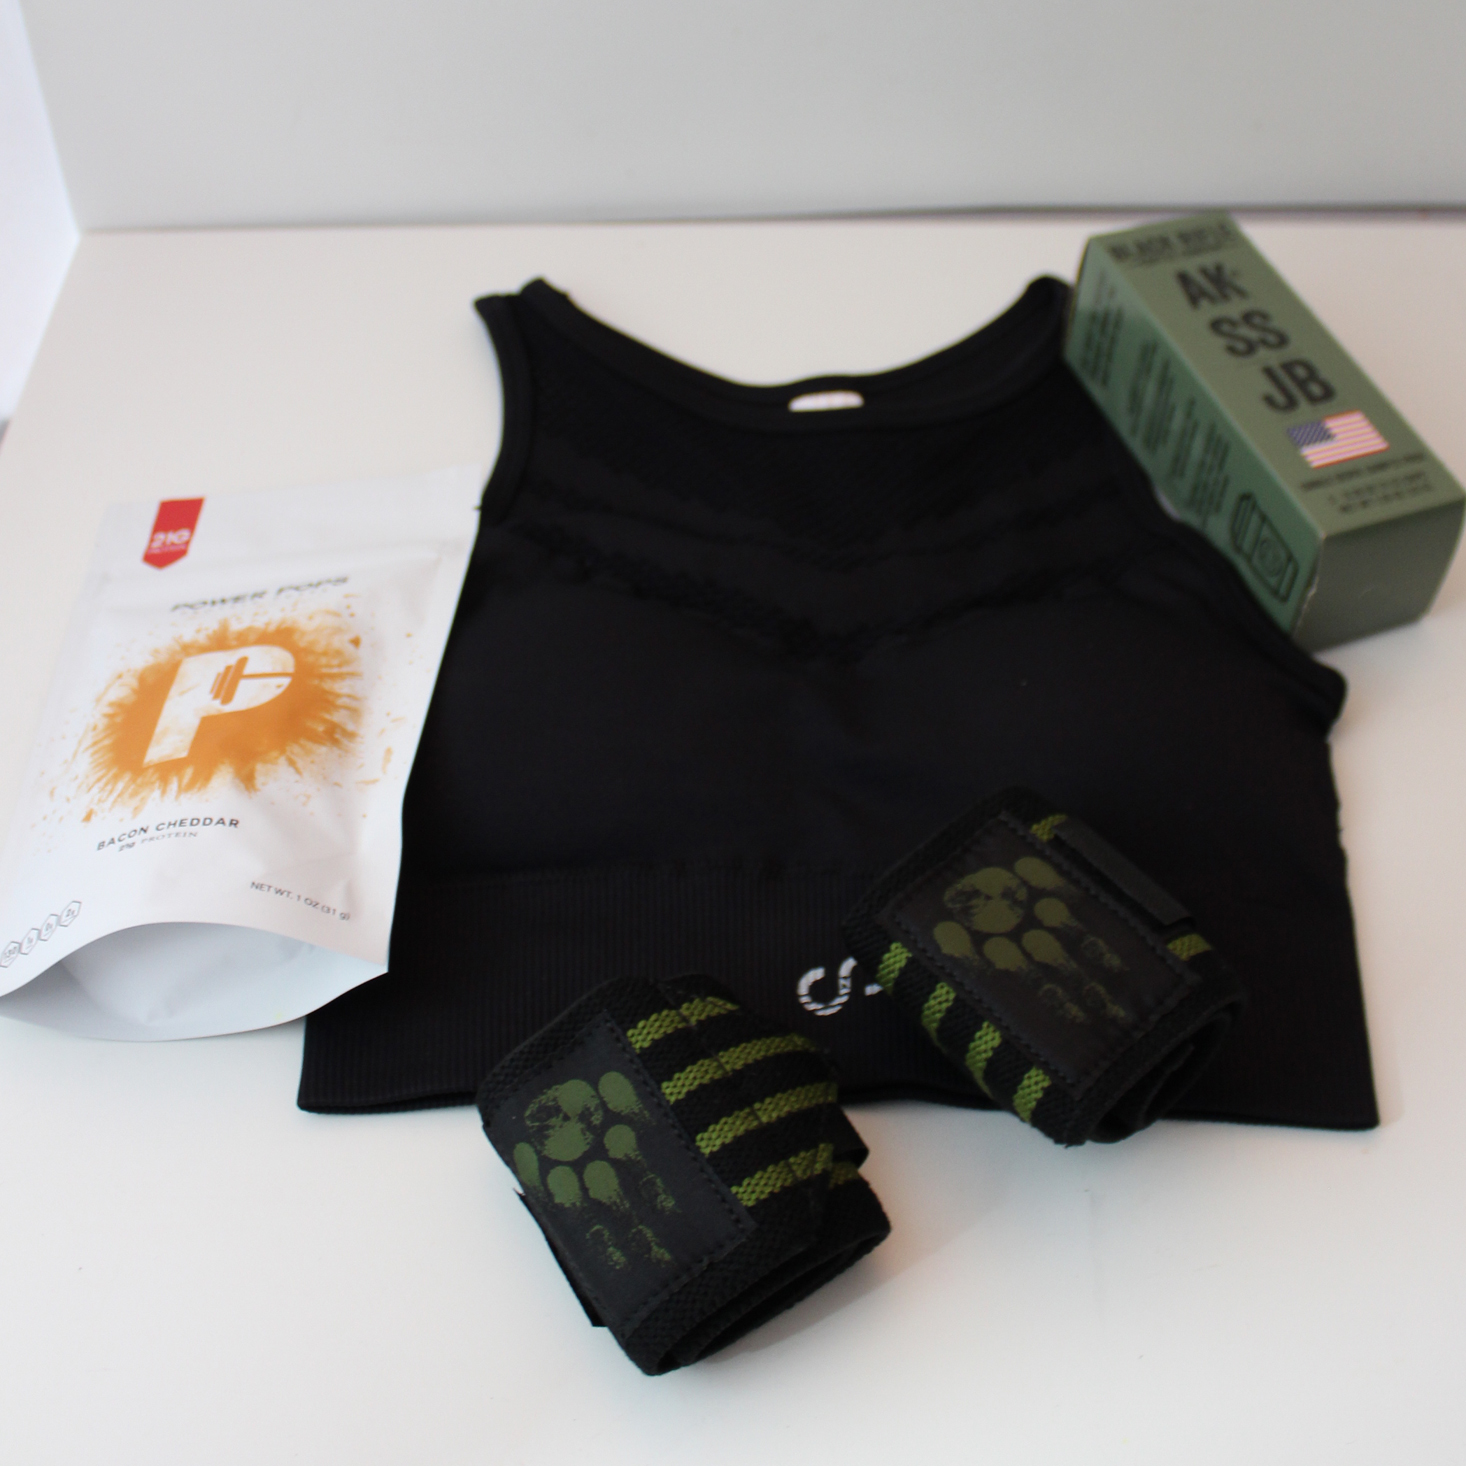 Gainz Box Fitness Subscription Review - October 2019